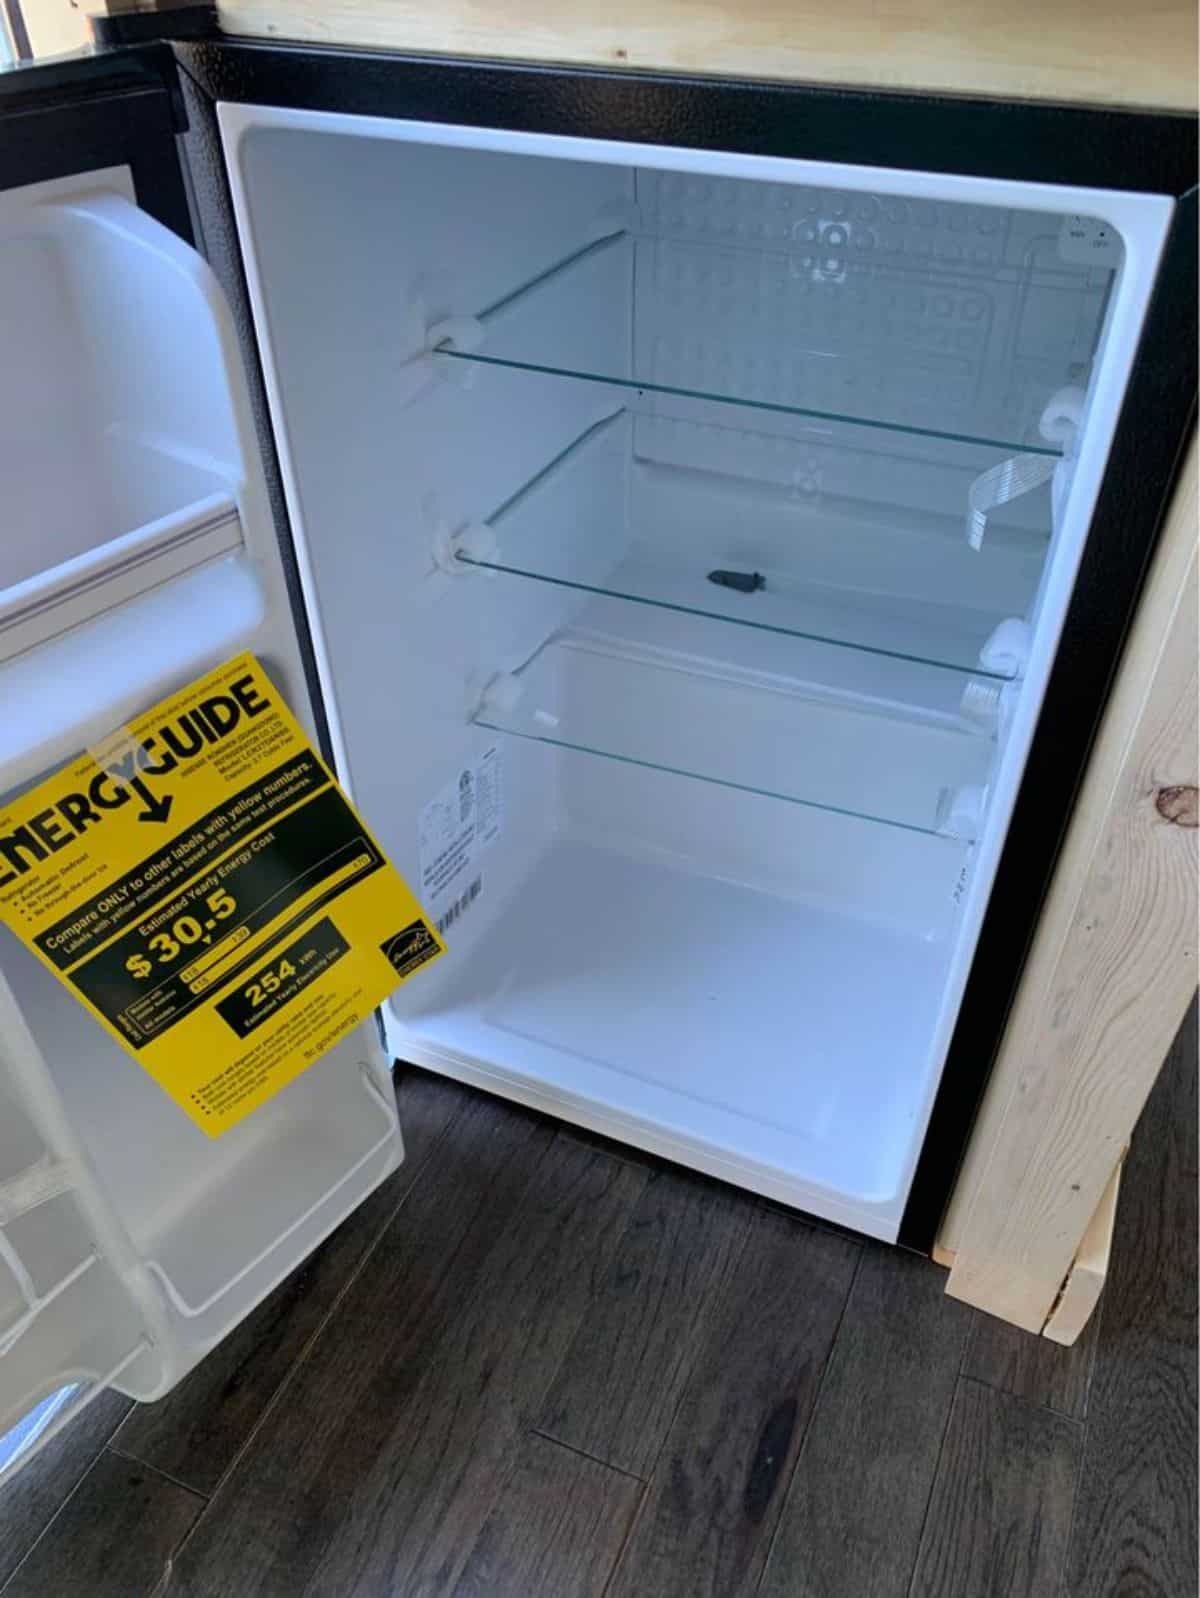 Mini refrigerator is also included in the deal